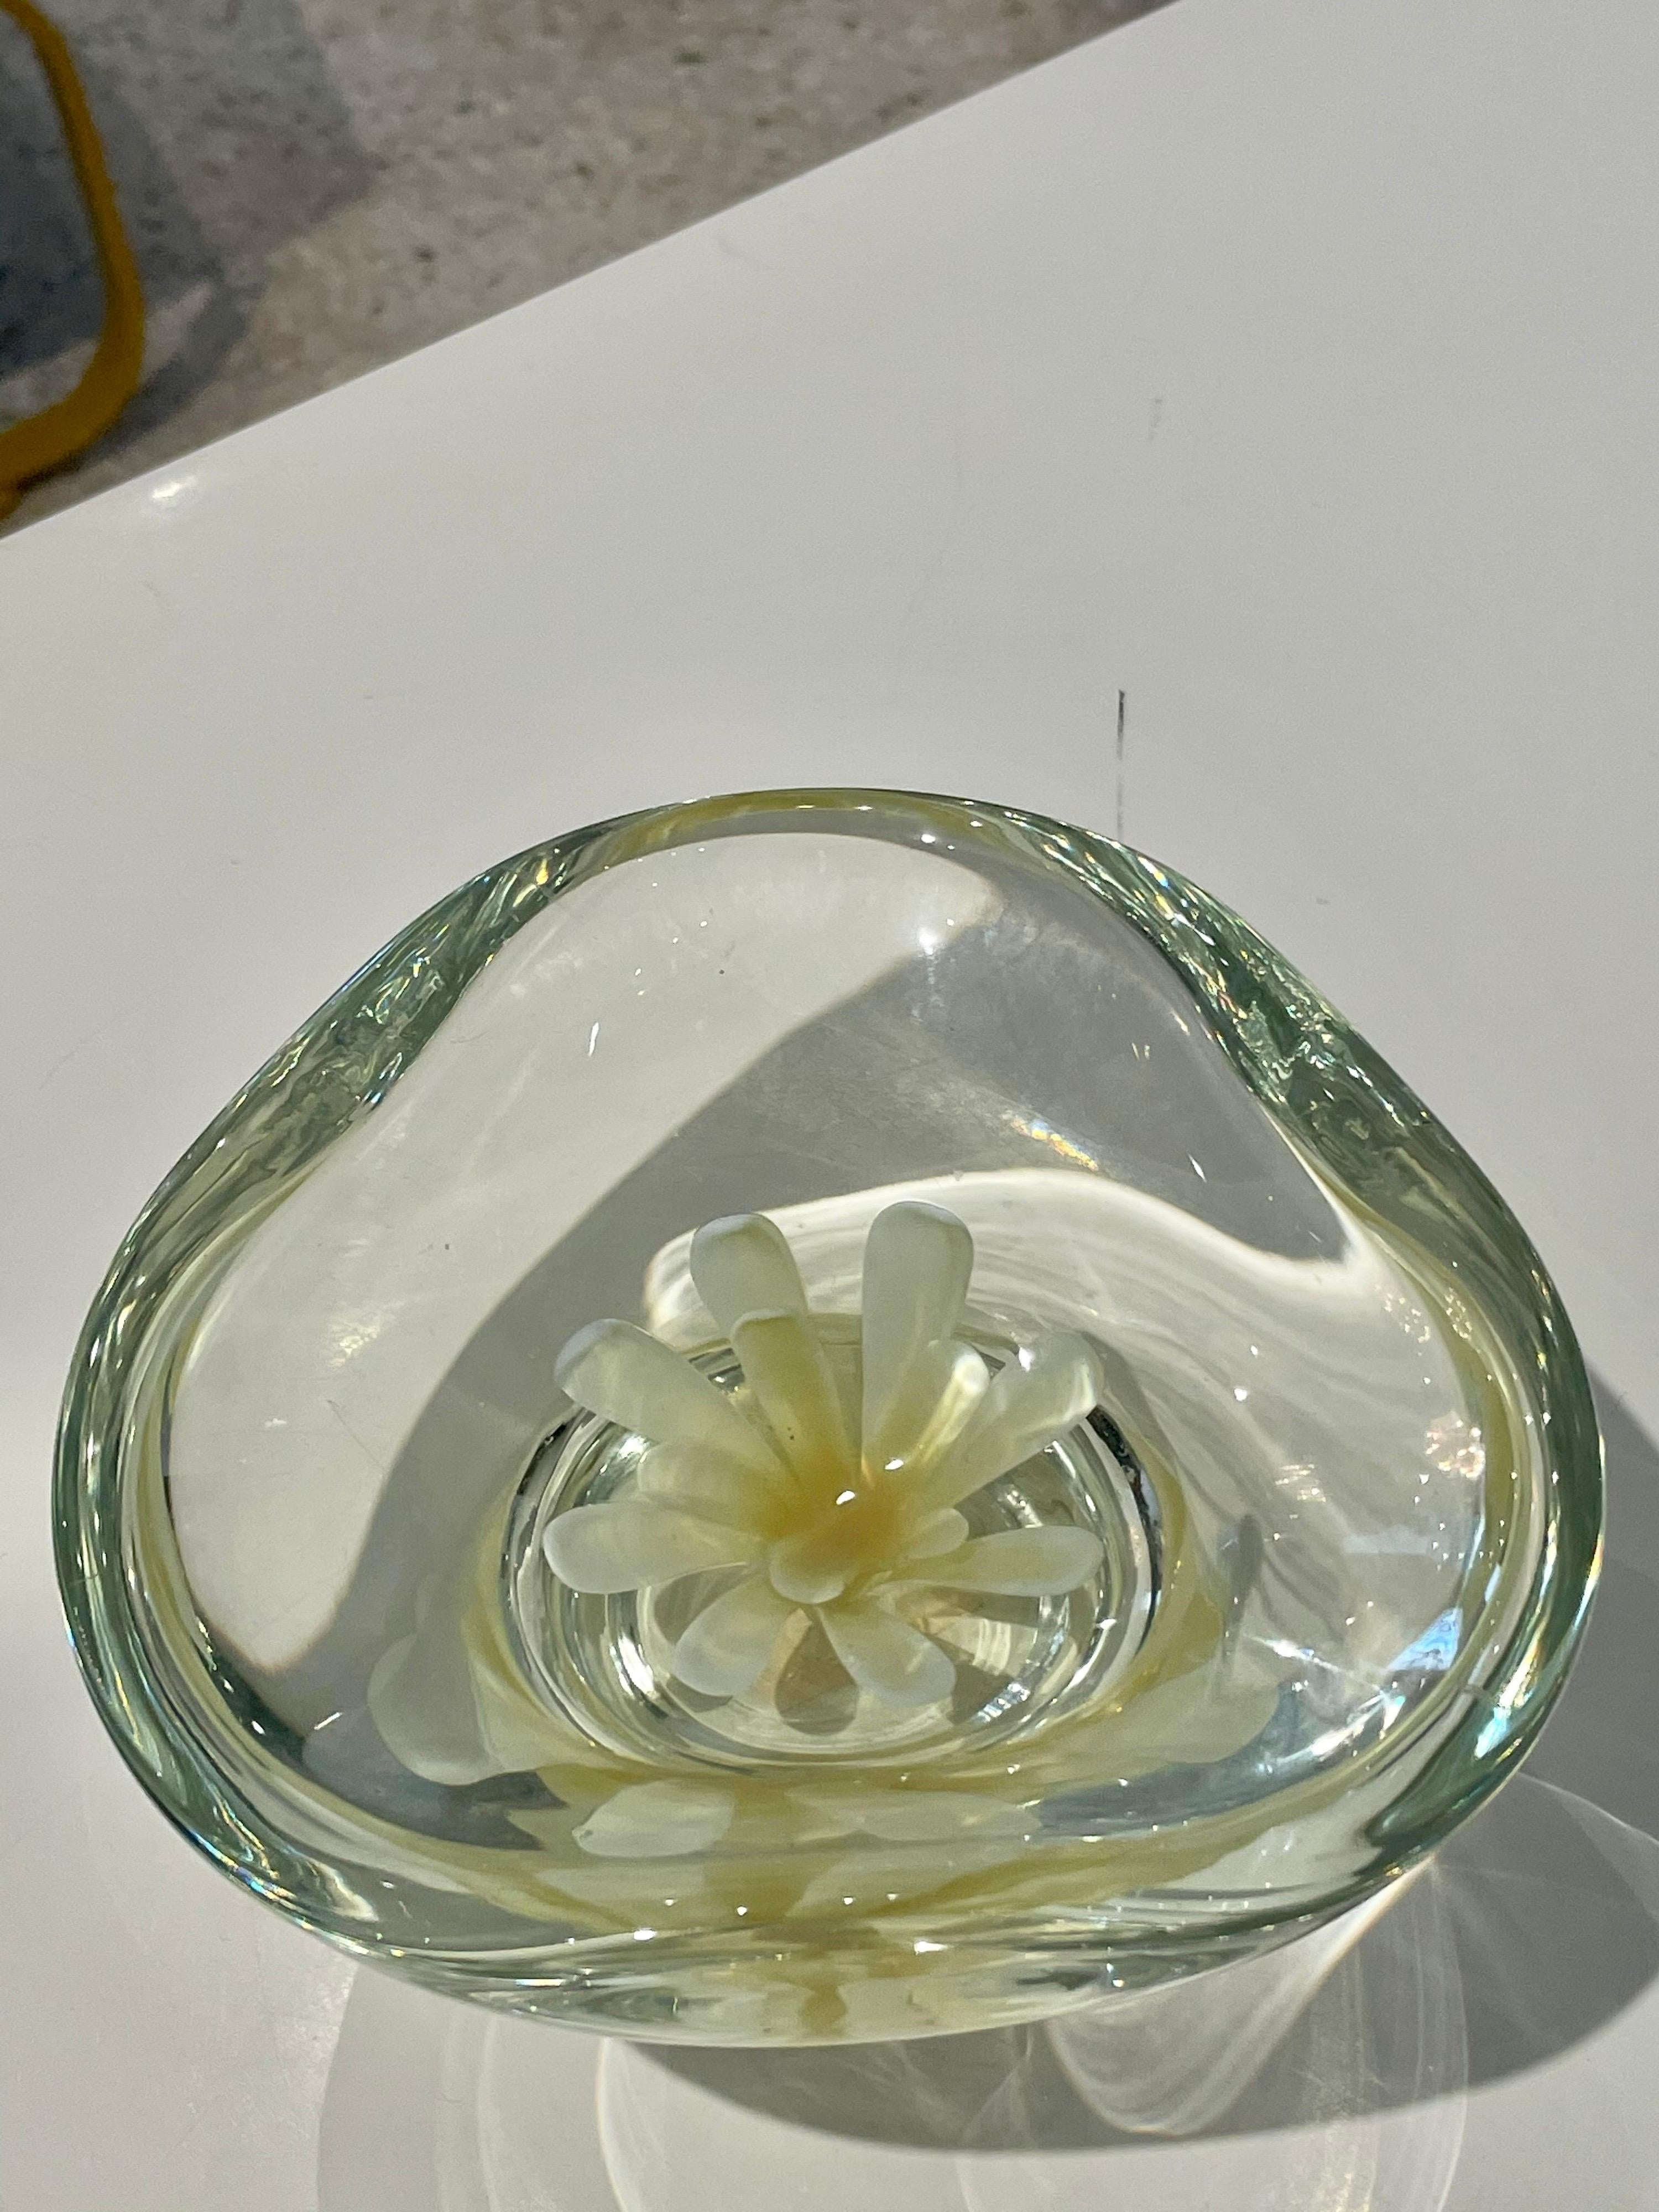 This wonderful little treasure features a floating flower to the center of this bowl, vide-poche. This vintage Murano glass piece is a soft canary yellow throughout - very special and summery.